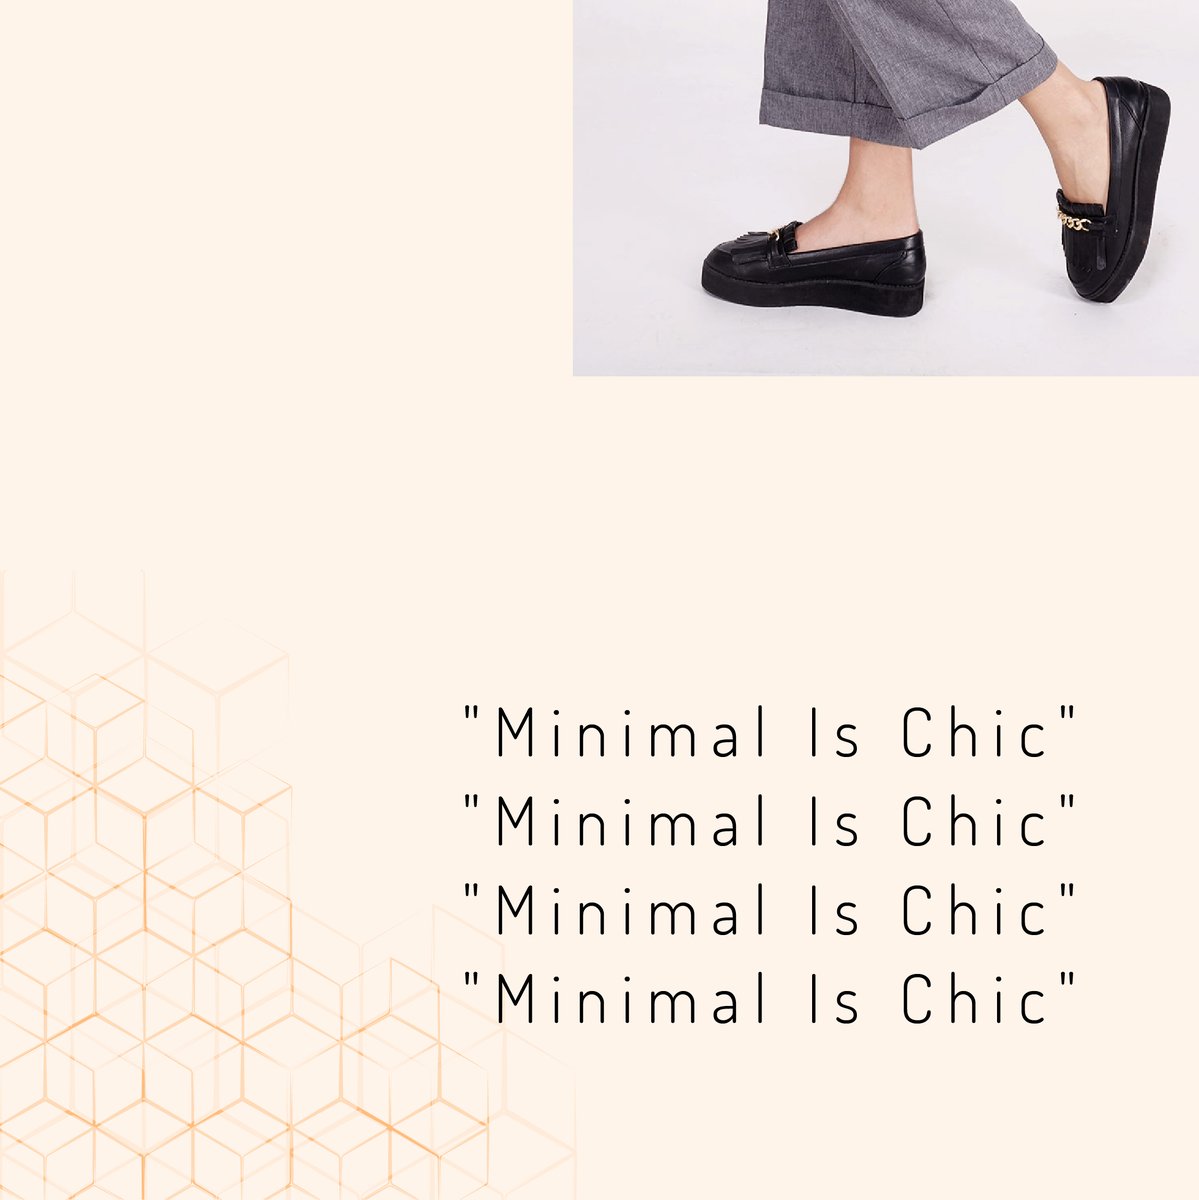 You don't always have to wear the latest fashion trend to look good. Effortless Chic women know it's about taste and style. Even with the most minimal pattern and color, they look fashionable.

#LetsTalkAboutYou #bodytalk #minimalchic